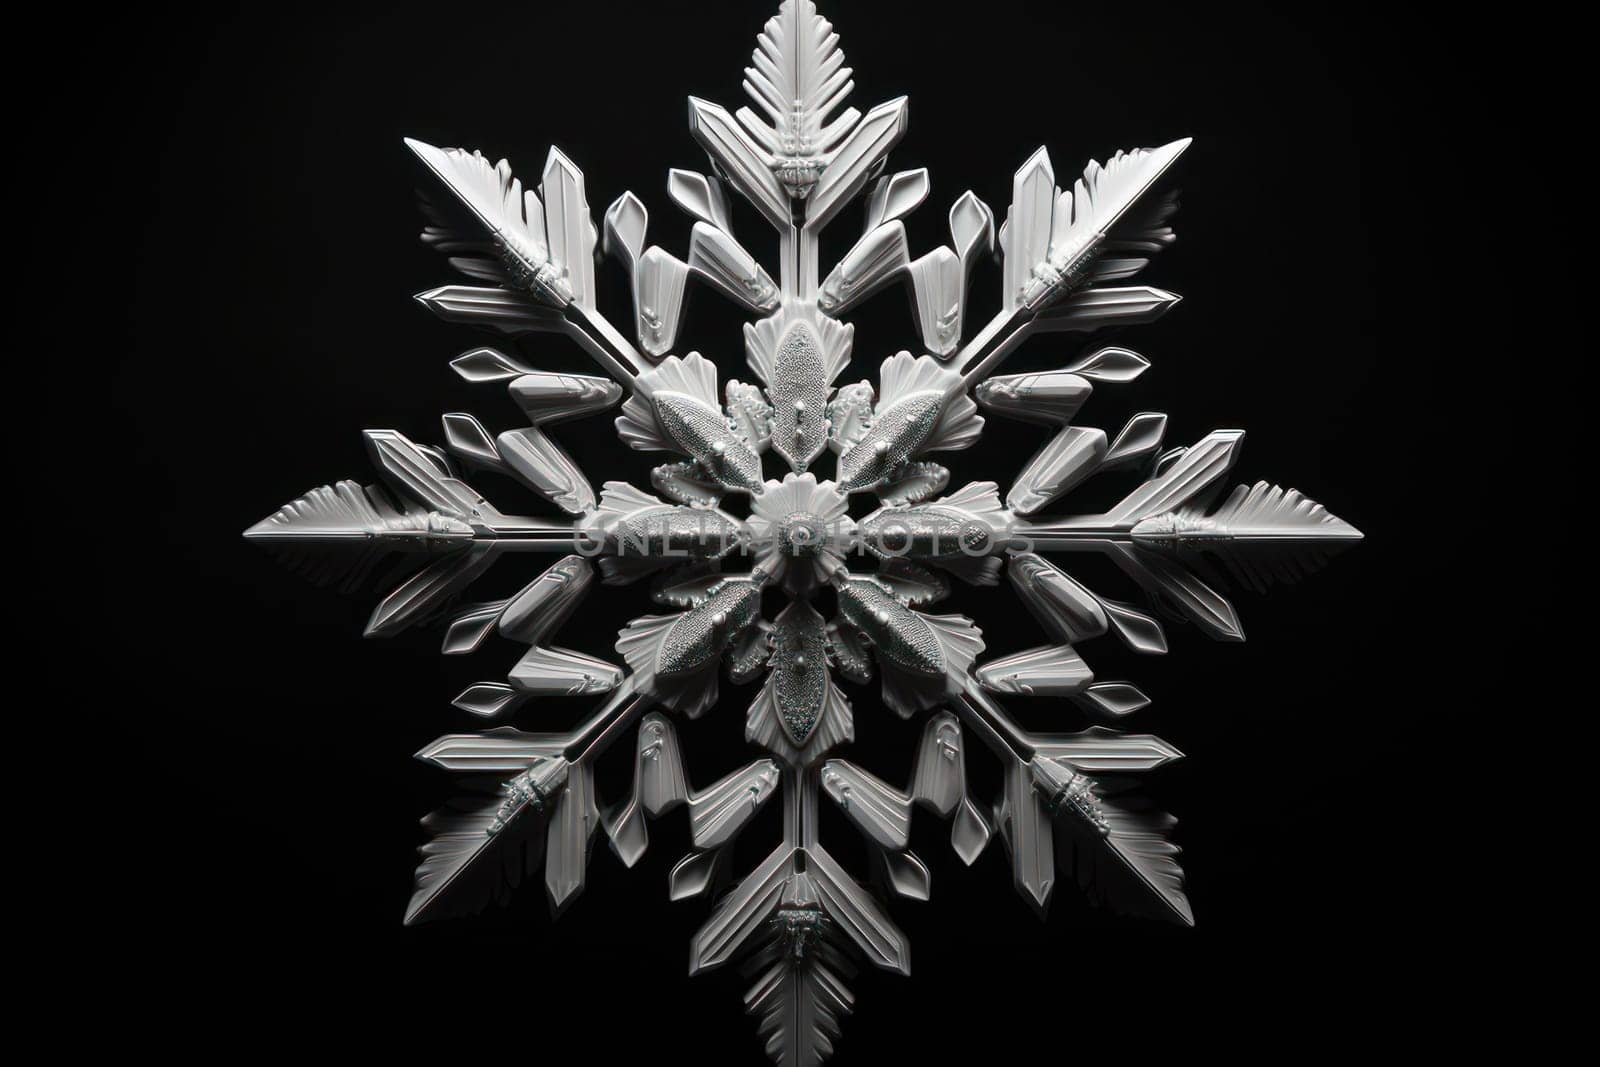 An artistic masterpiece showcasing the exquisite details and singular beauty of individual snowflakes, captured through the lens of macro photography, unraveling their complex, one-of-a-kind designs.